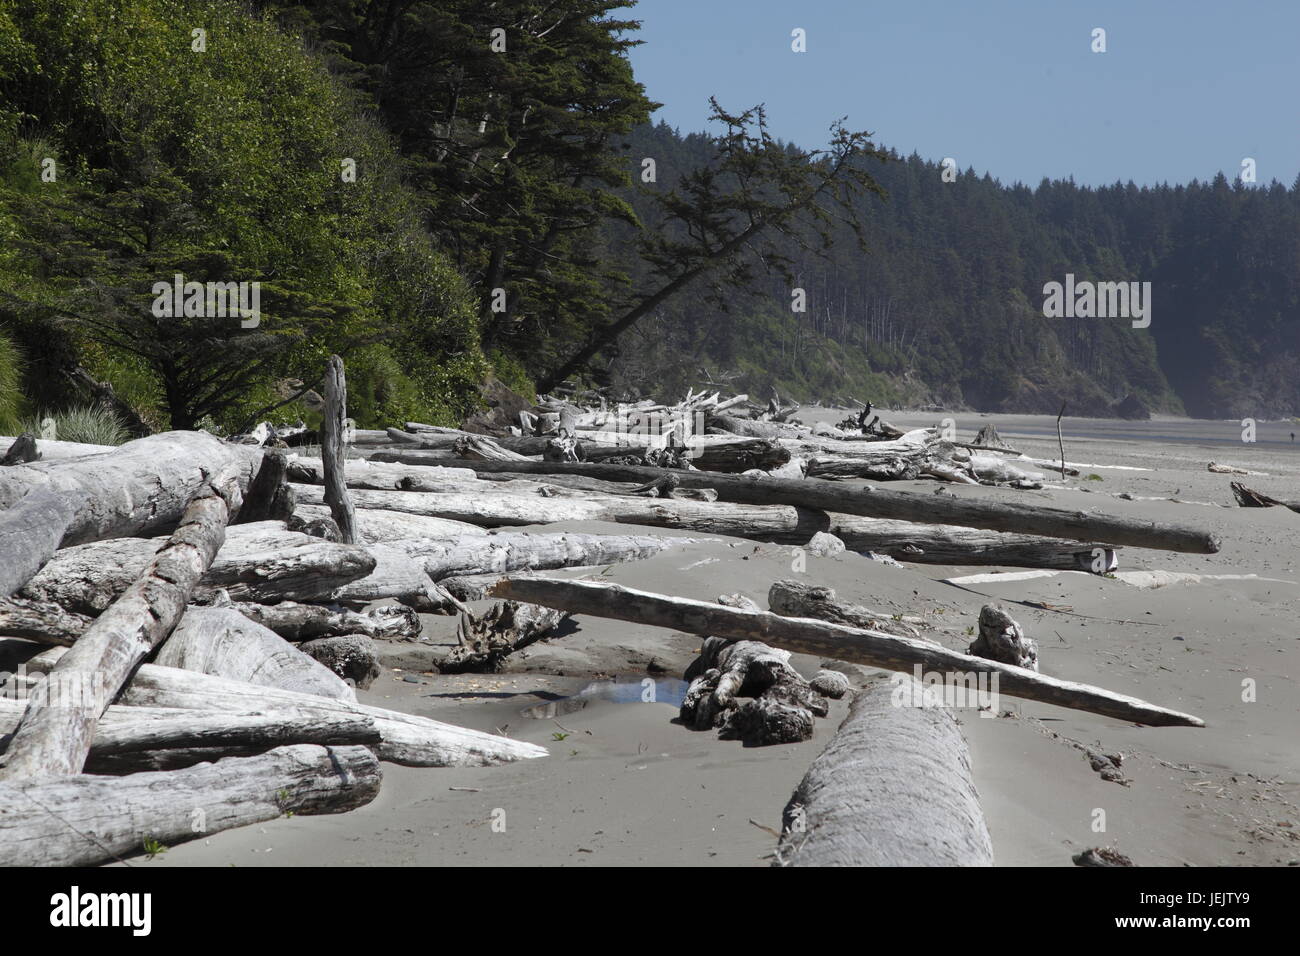 Second beach, Olympic national park Stock Photo